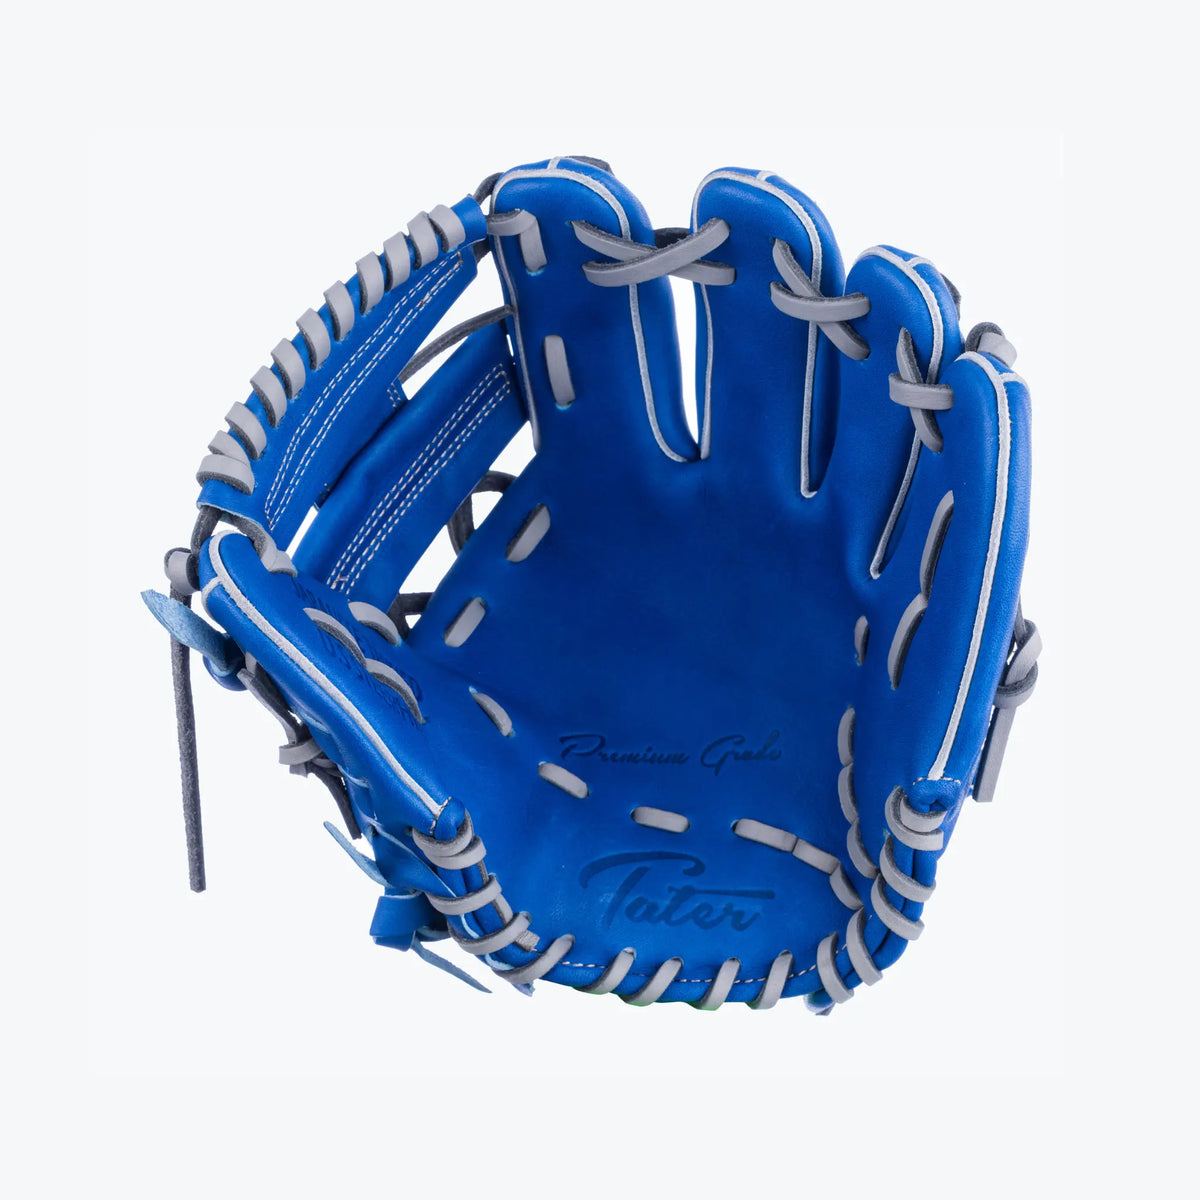 Premium royal blue infield baseball glove by Tater Baseball, 9.5-inch size, featuring durable grey lacing and deep pocket design for enhanced ball control and secure catch, side inside view highlighting the &#39;Tater&#39; and &#39;Premium Grade&#39; embossed logos.